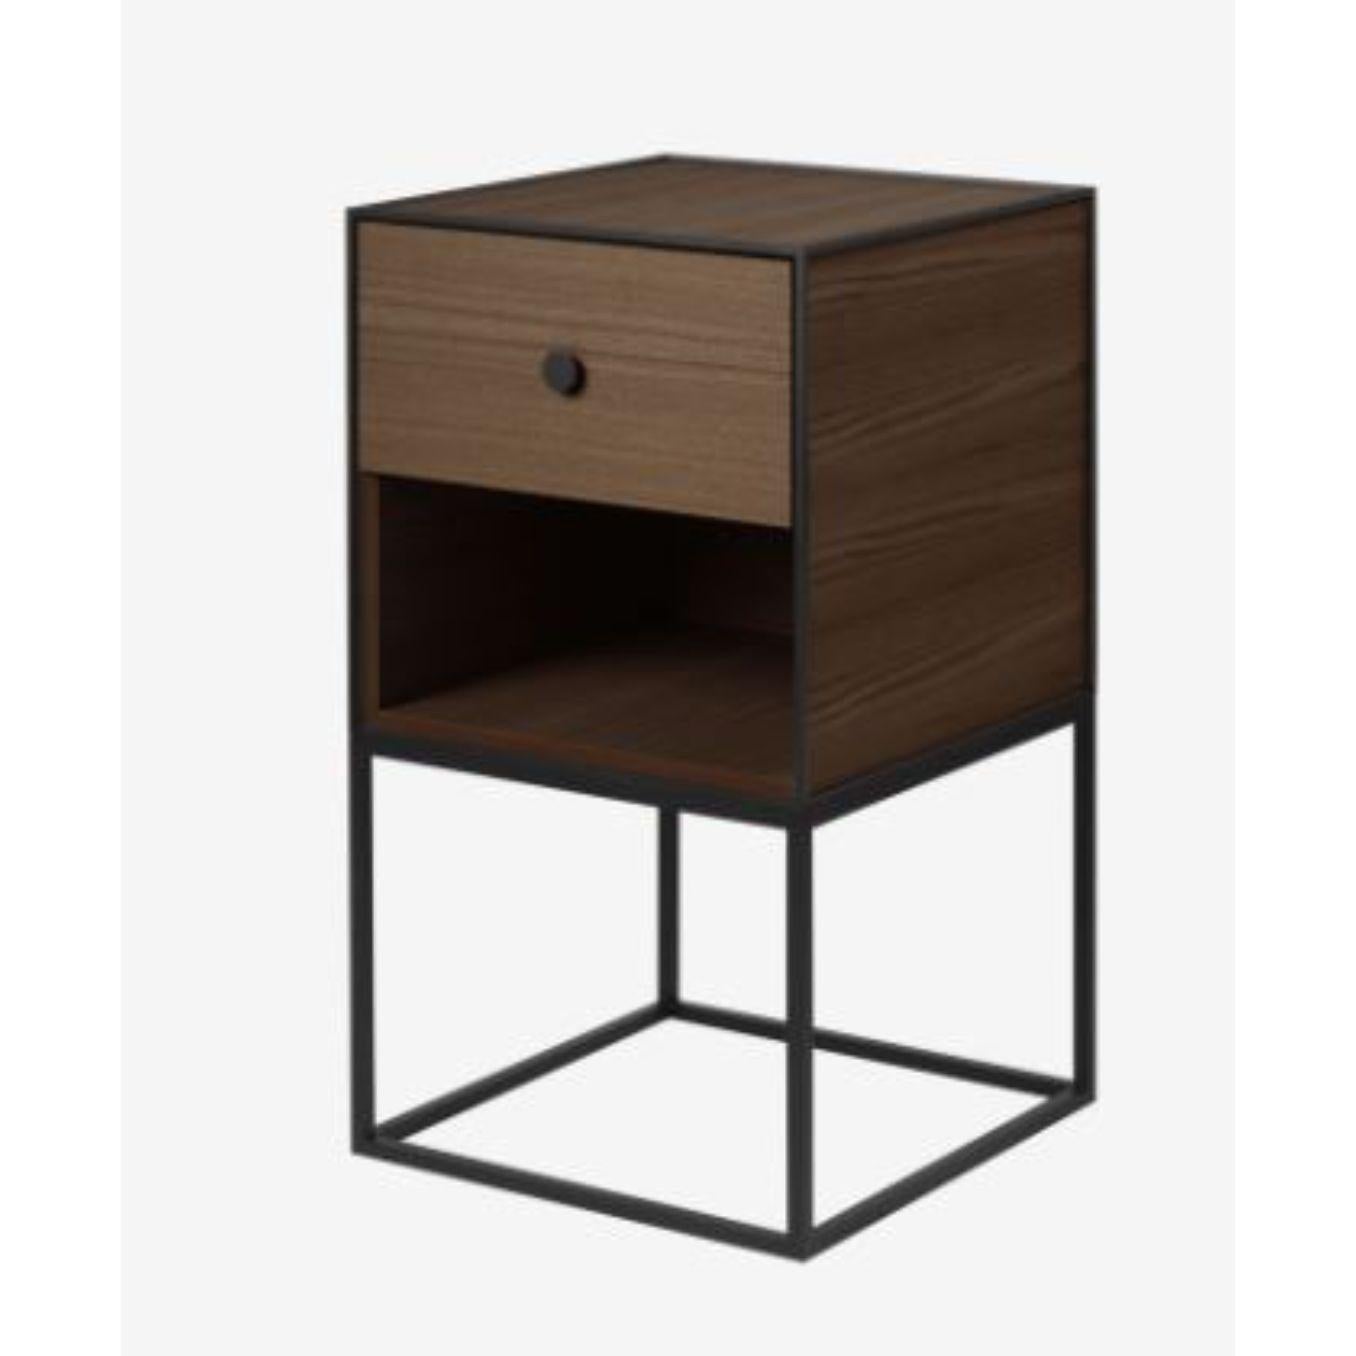 35 smoked oak frame sideboard with 1 drawer by Lassen.
Dimensions: W 35 x D 35 x H 63 cm. 
Materials: Finér, Melamin, Melamine, Metal, Veneer, Oak.
Also available in different colors and dimensions.
Weight: 15.50 Kg.

By Lassen is a Danish